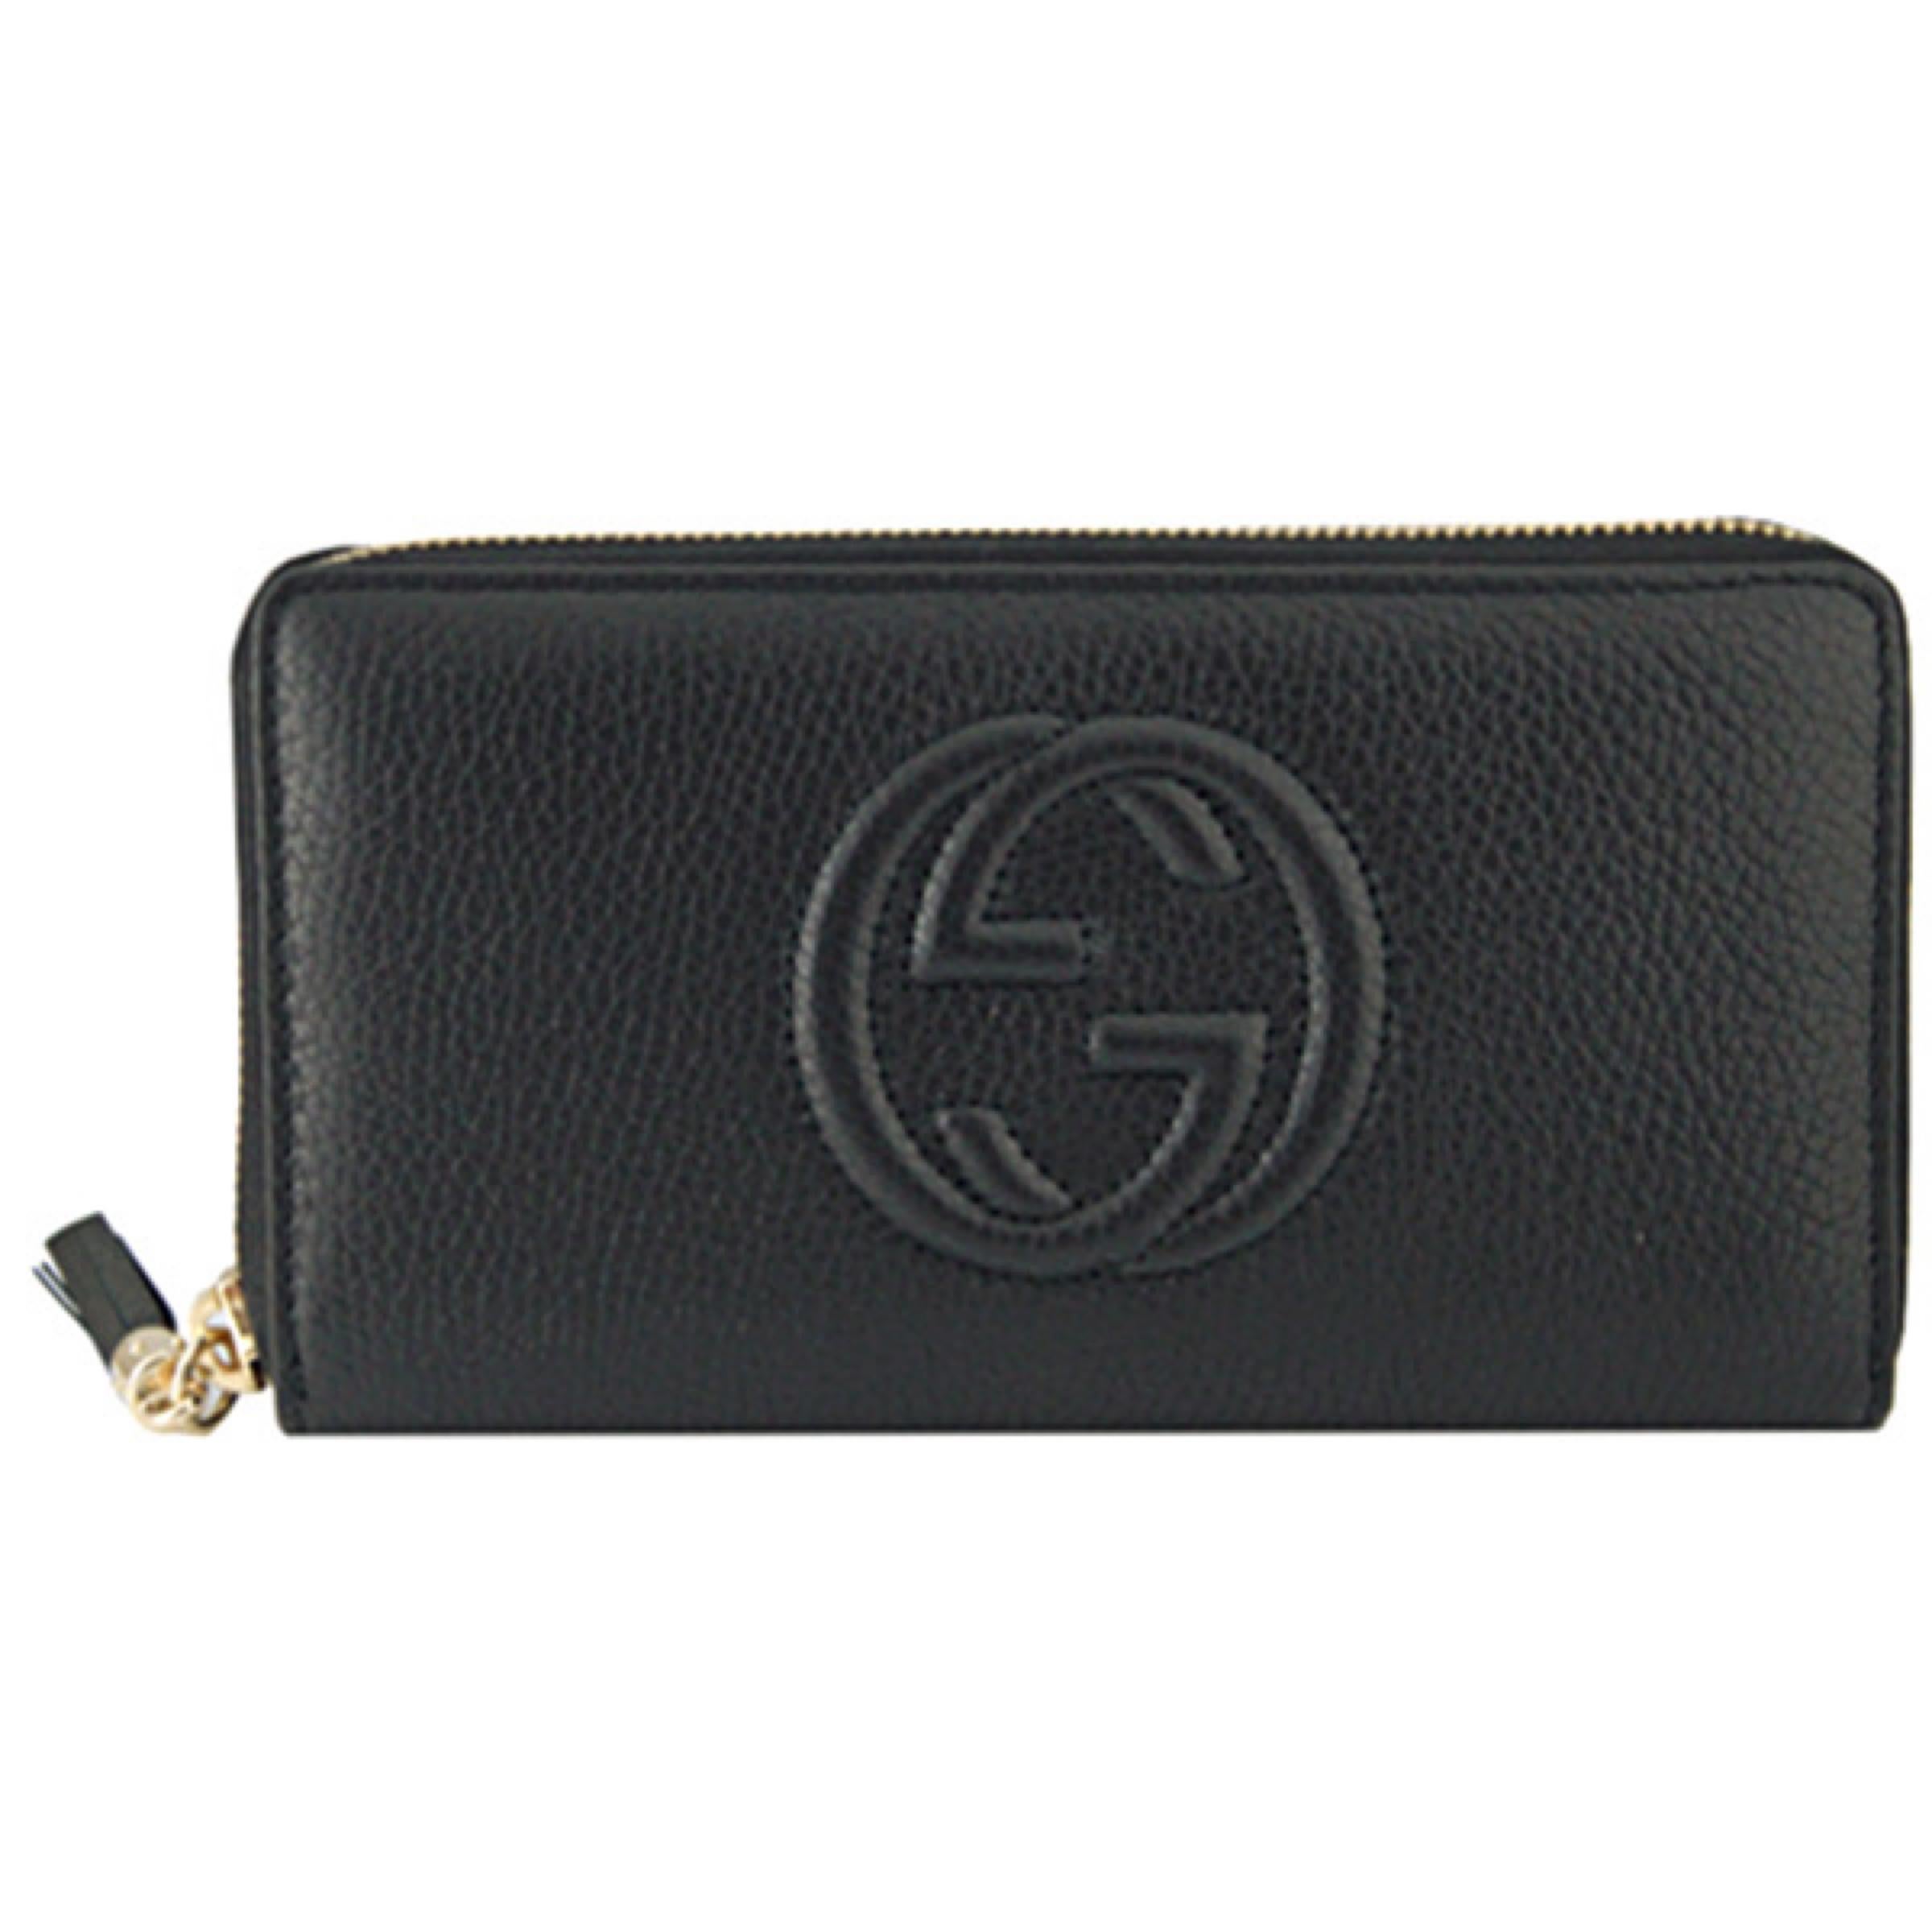 New Gucci Soho Black Leather Zip Around Leather Long Wallet Clutch Bag

Authenticity Guaranteed

DETAILS
Brand: Gucci
Condition: Brand new
Gender: Women
Category: Clutch
Color: Black
Material: Leather
Gucci soho logo
Gold-tone hardware
Zip around